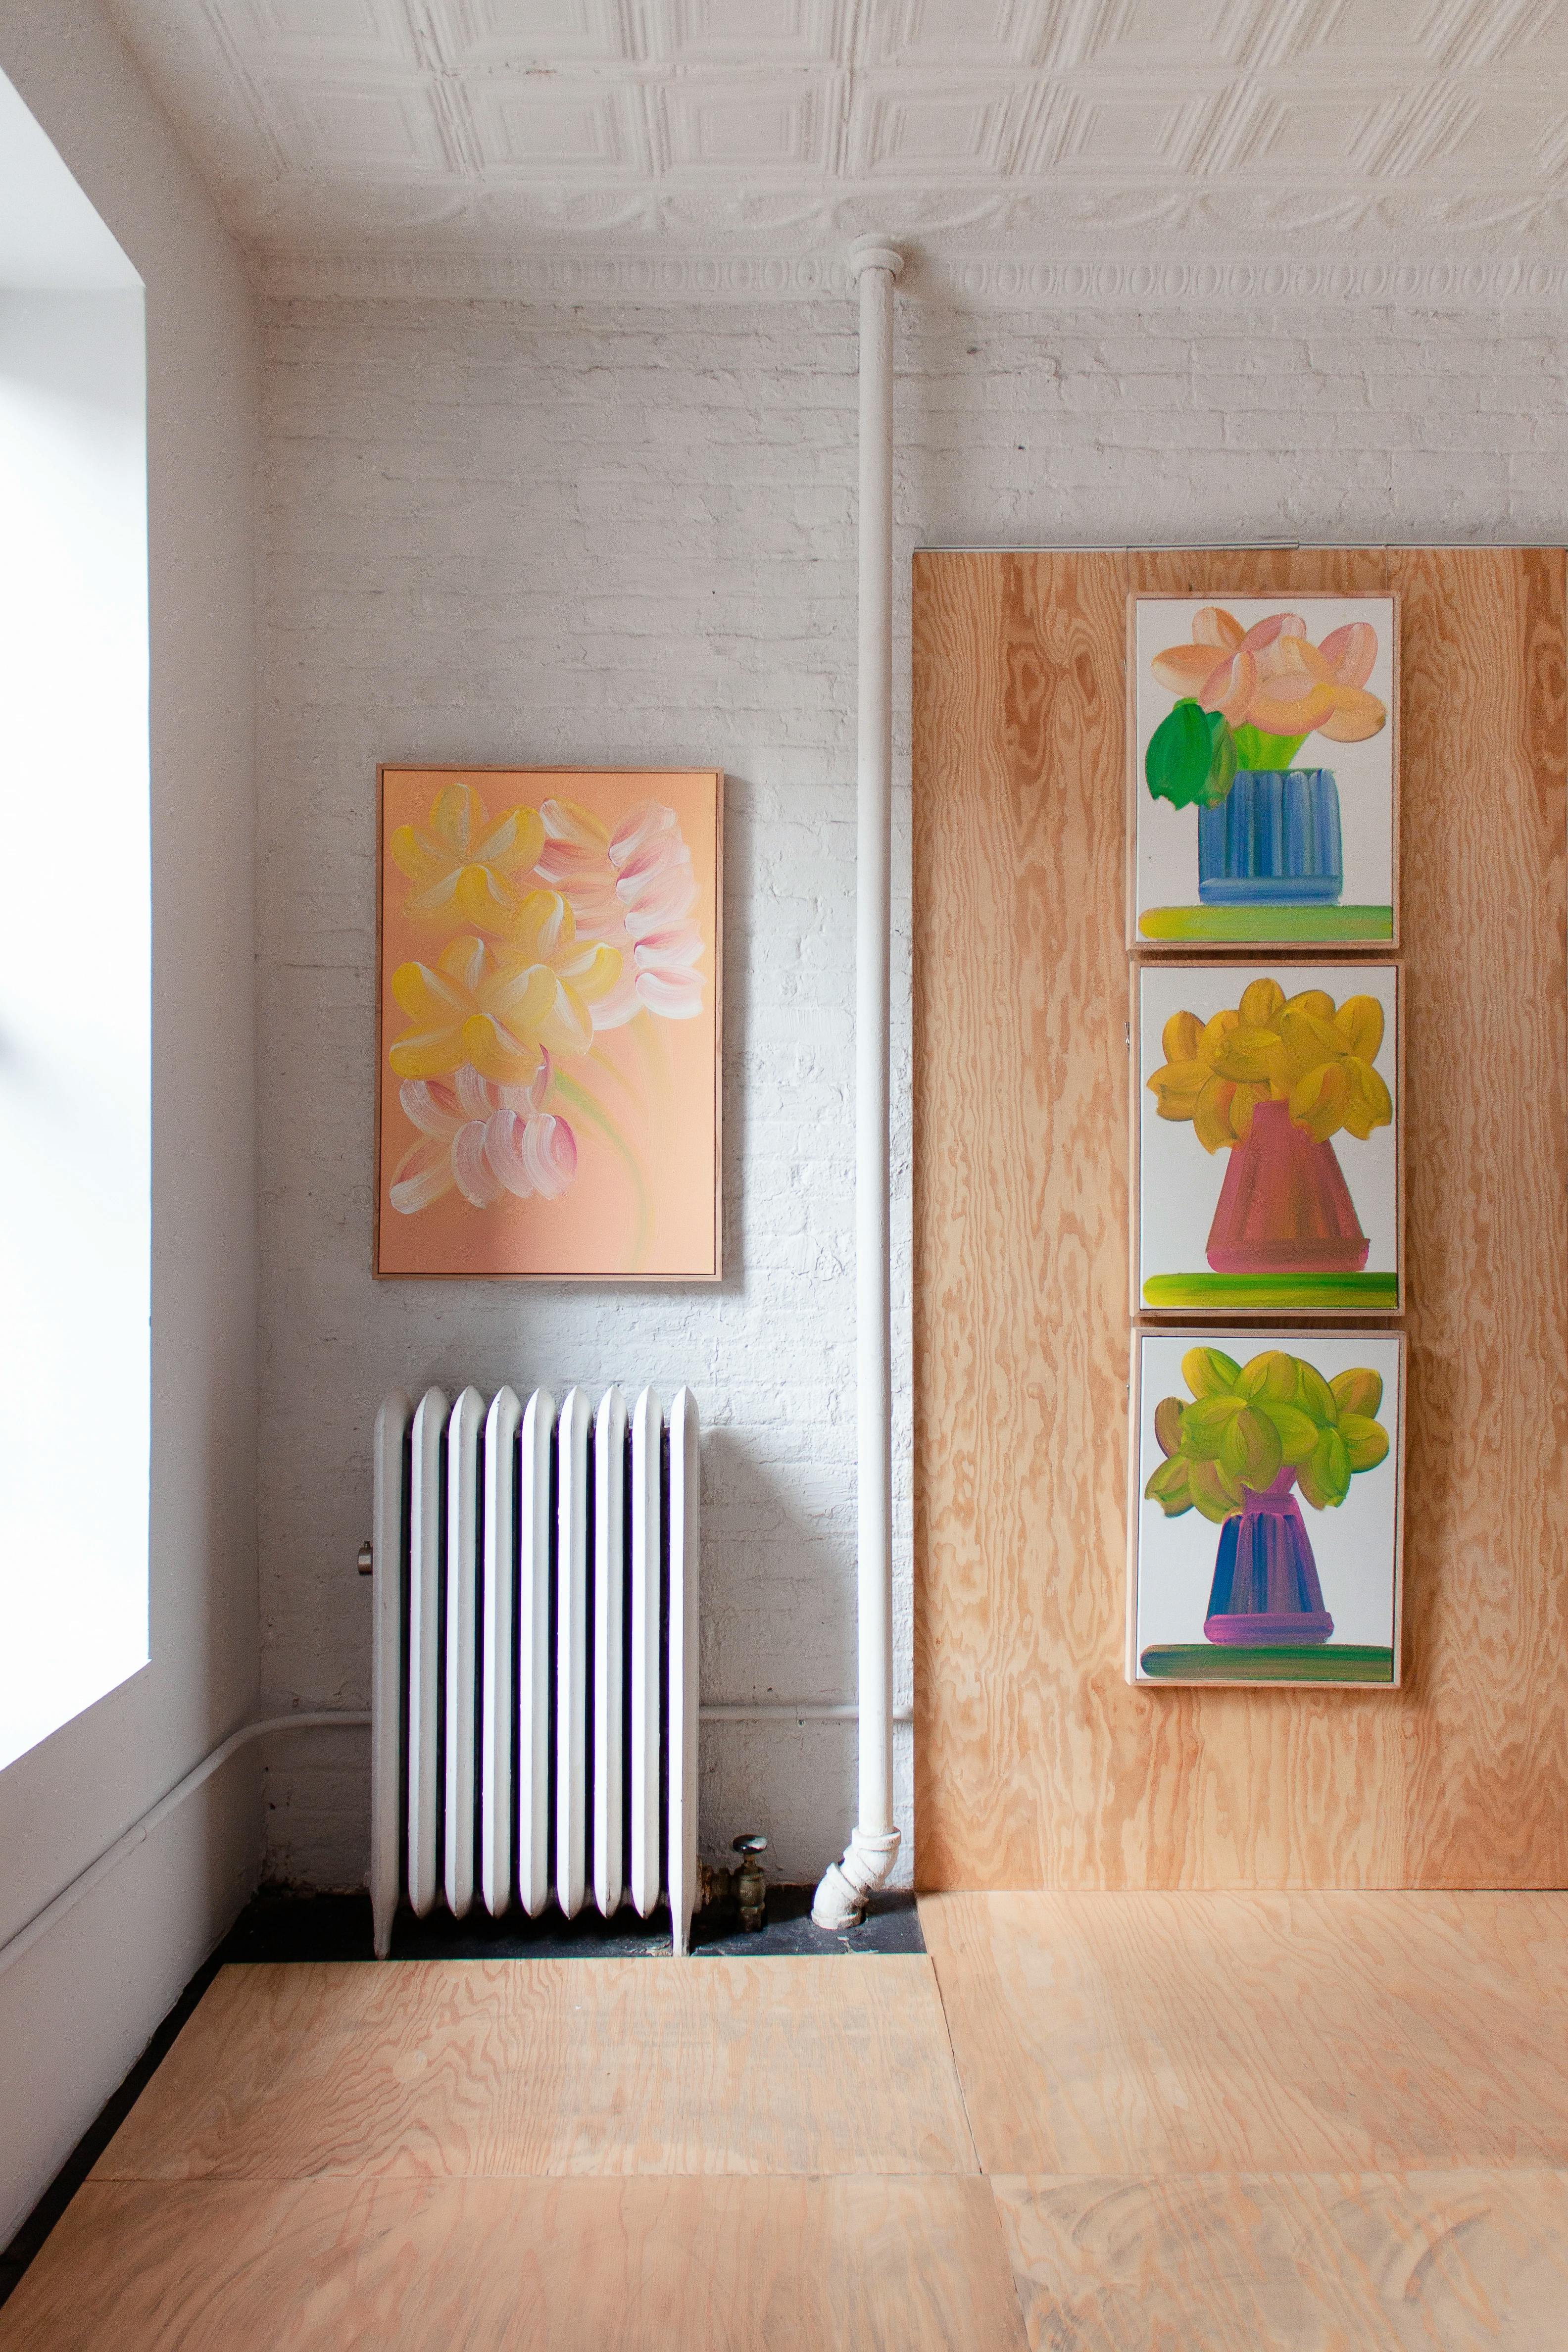 Paintings by Erin D. Garcia, including three vertical depictions of flowers and one abstracted bouquet on a peach background, on wood-clad walls in the exhibition Group 5.